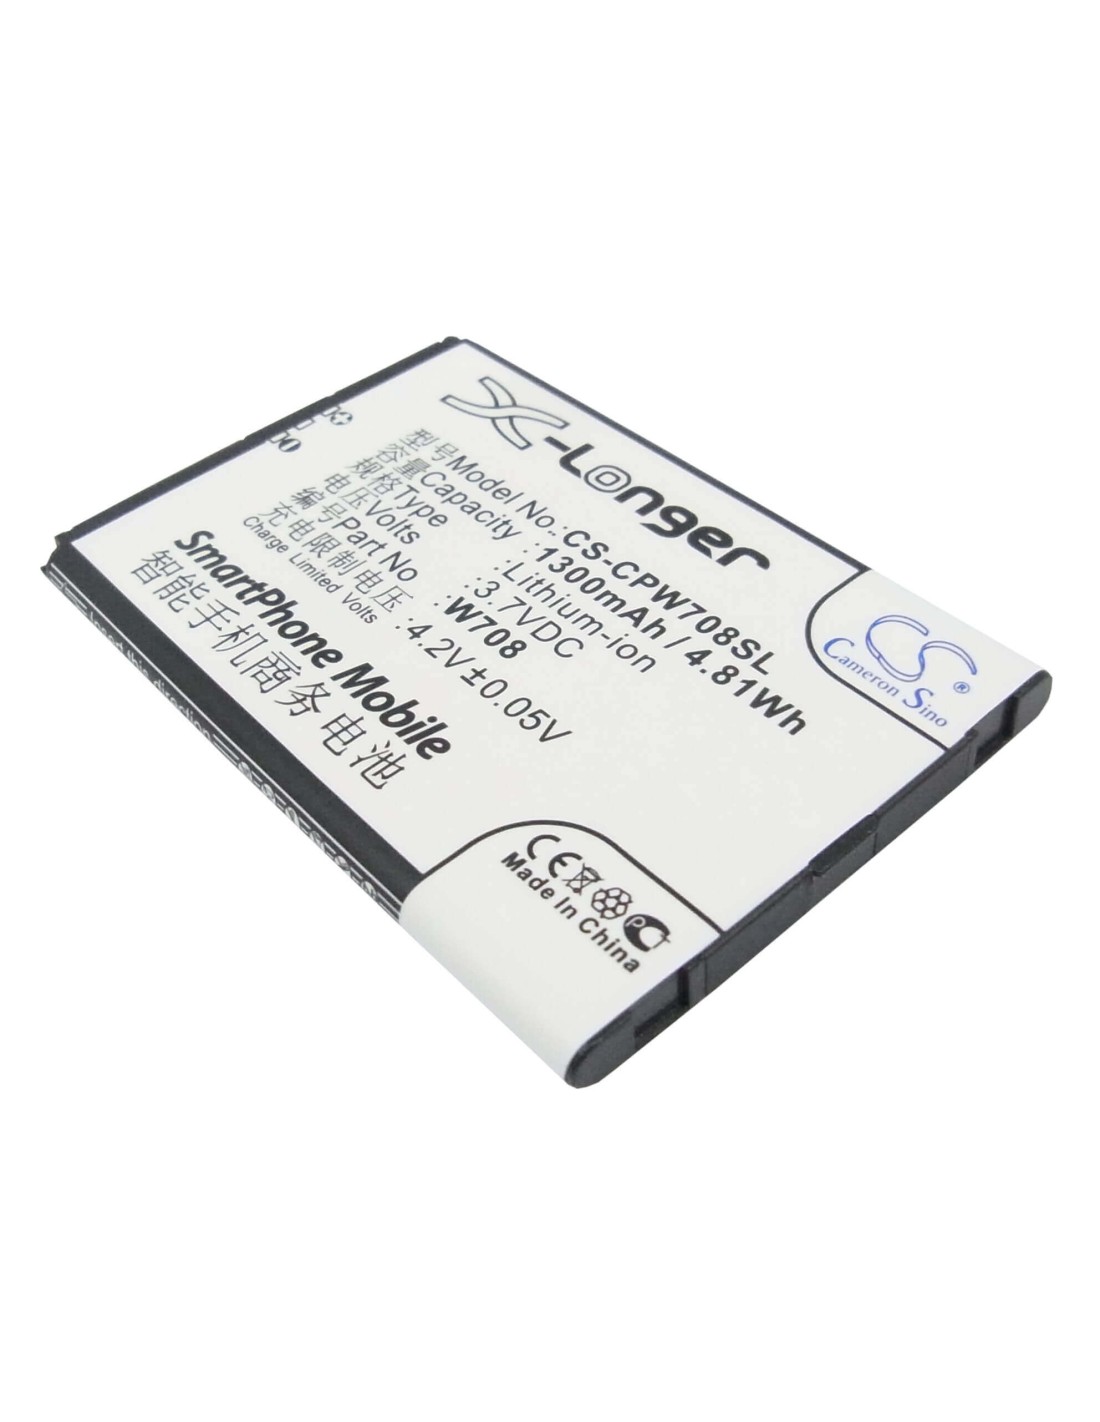 Battery for Coolpad W708 3.7V, 1300mAh - 4.81Wh